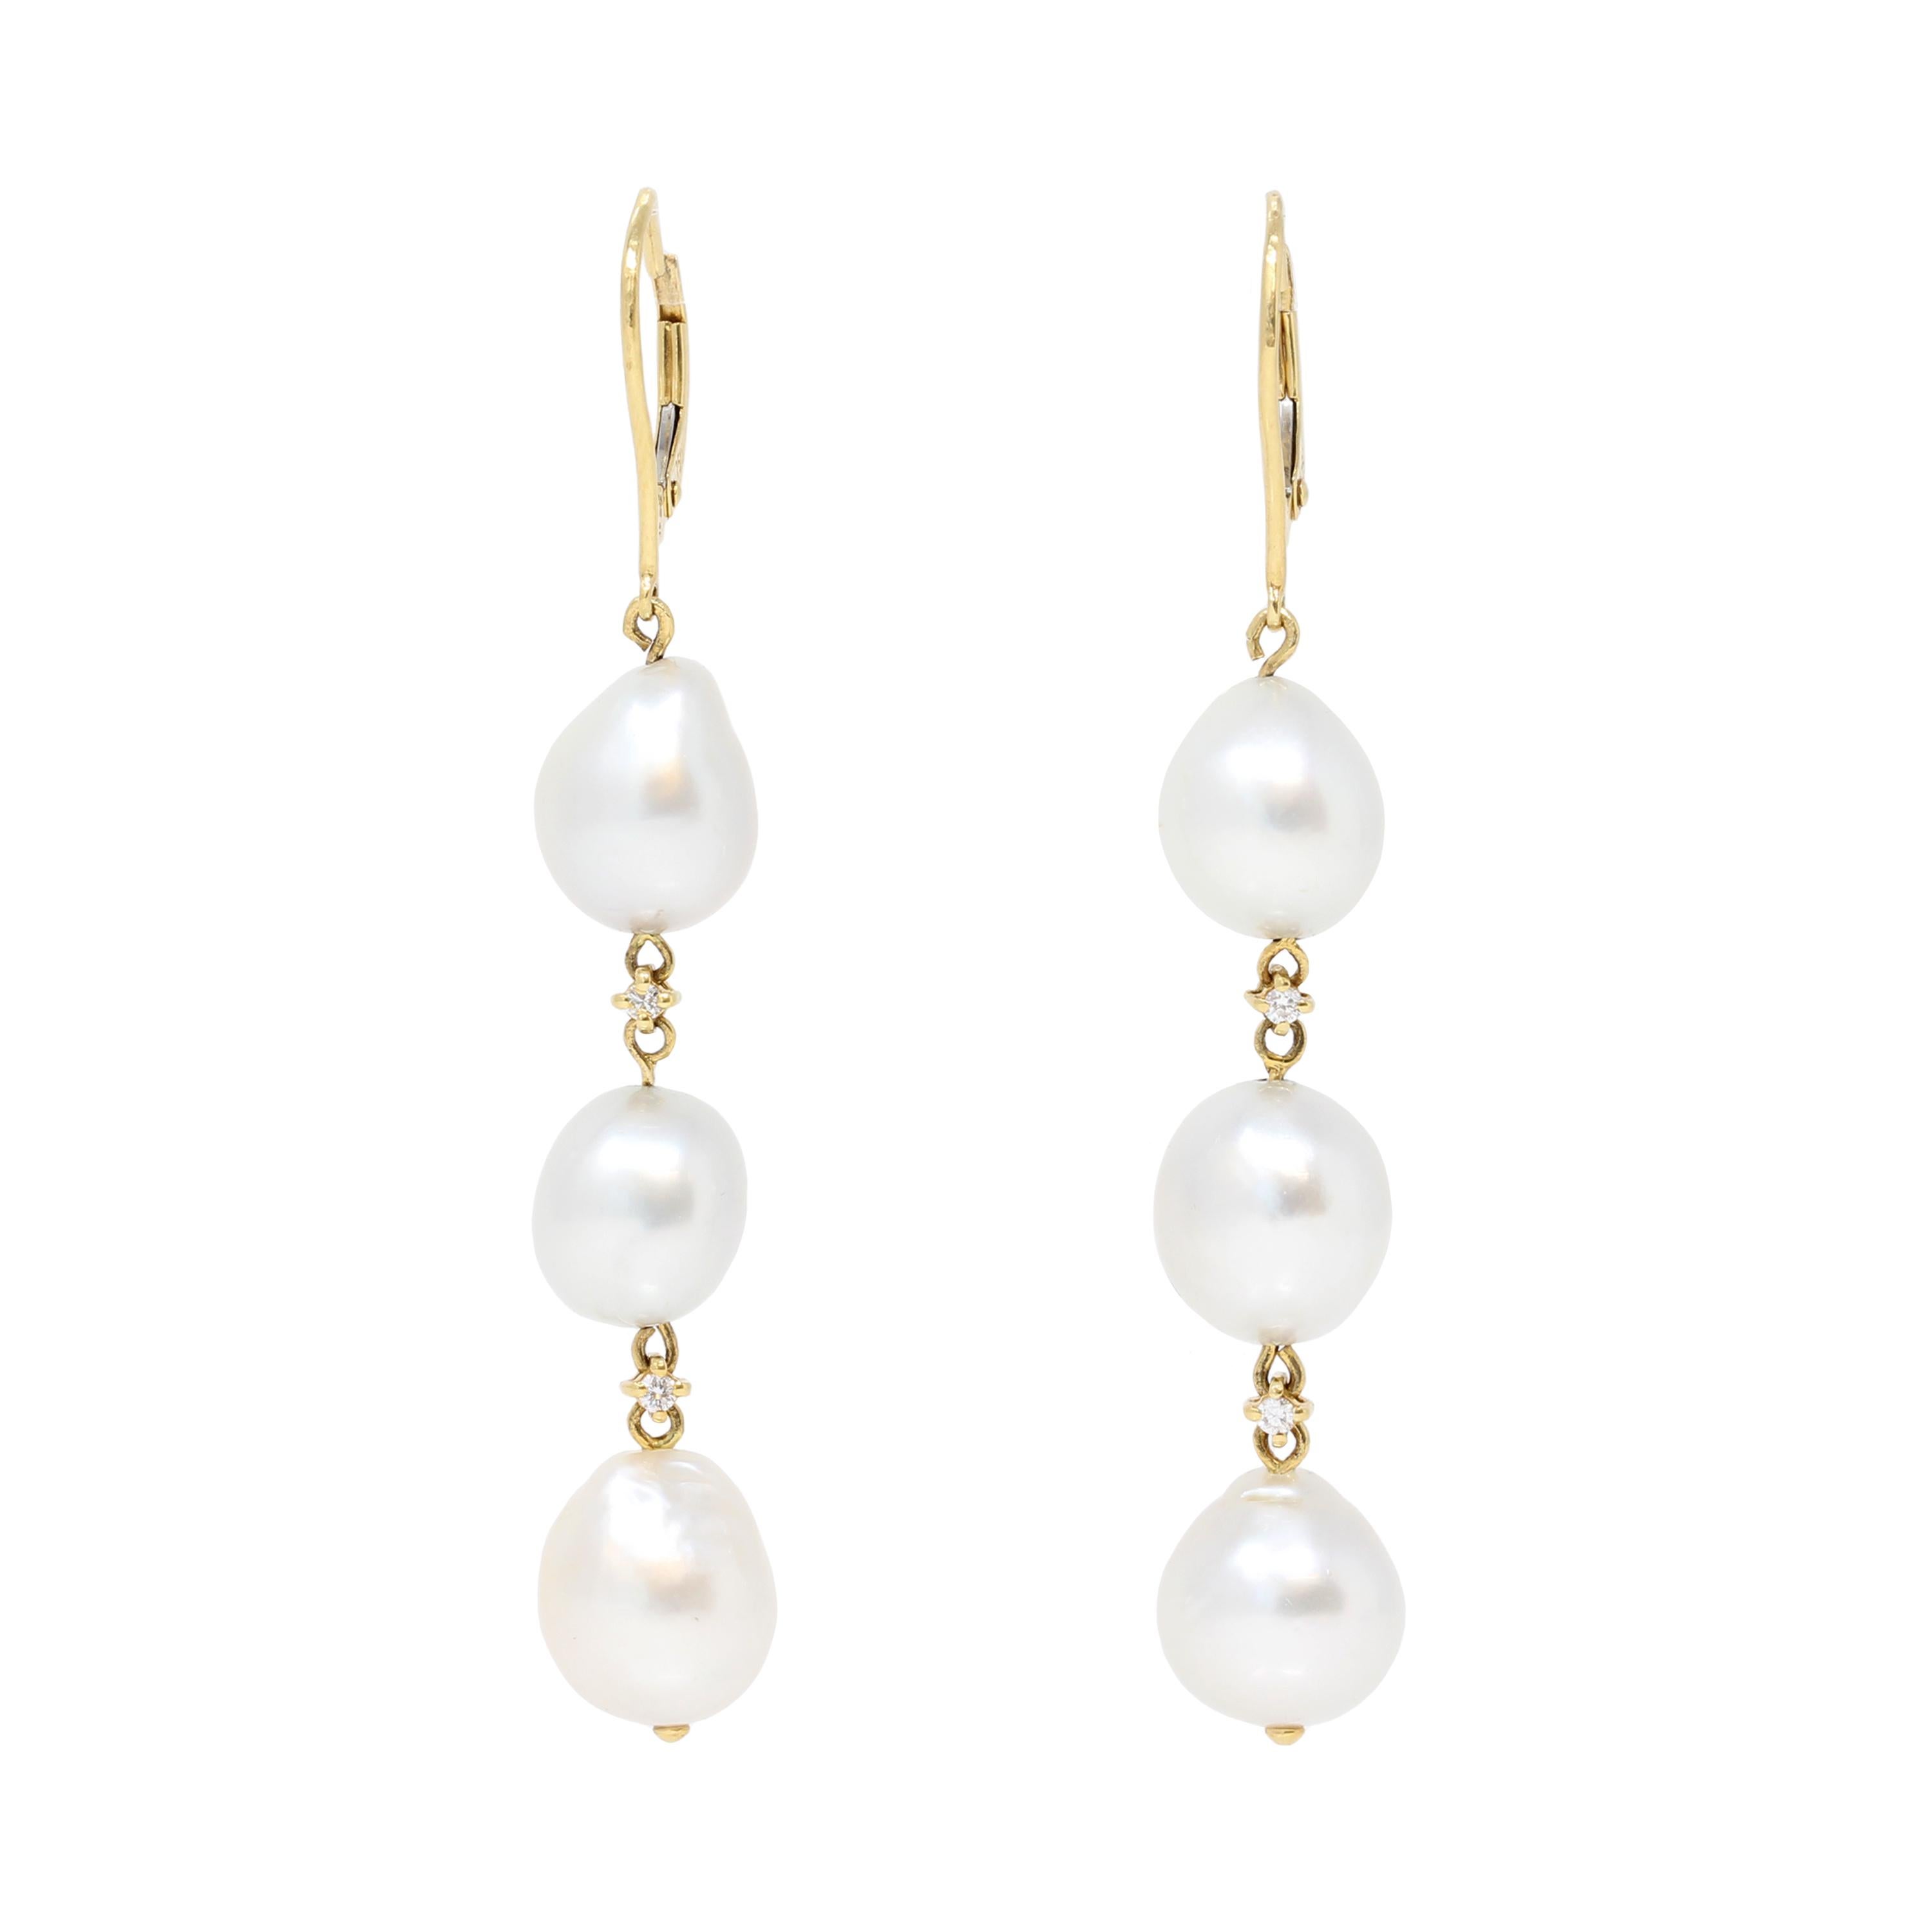 A pair of dangling South-Sea baroque pearl earrings in 18K yellow gold with diamond accents. Made at the beginning of the century,  these earrings feature three 10 to 11-millimeter pearls with very good luster and minor surface inclusions. The